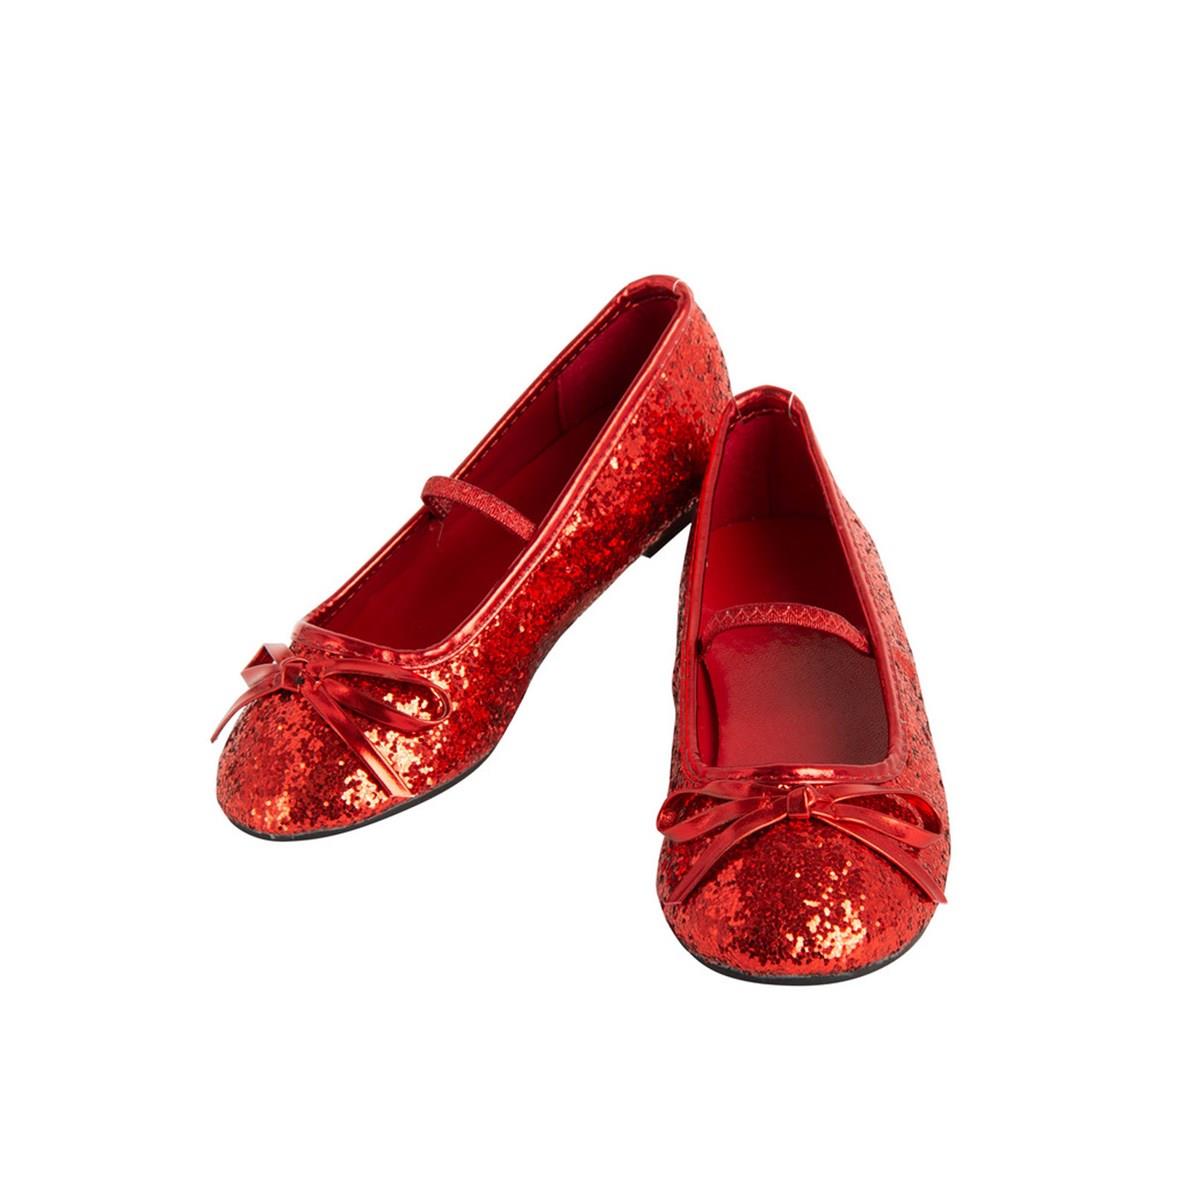 Picture of Rubies 278322 Girls Ballet Shoe - Red, Size 9-10